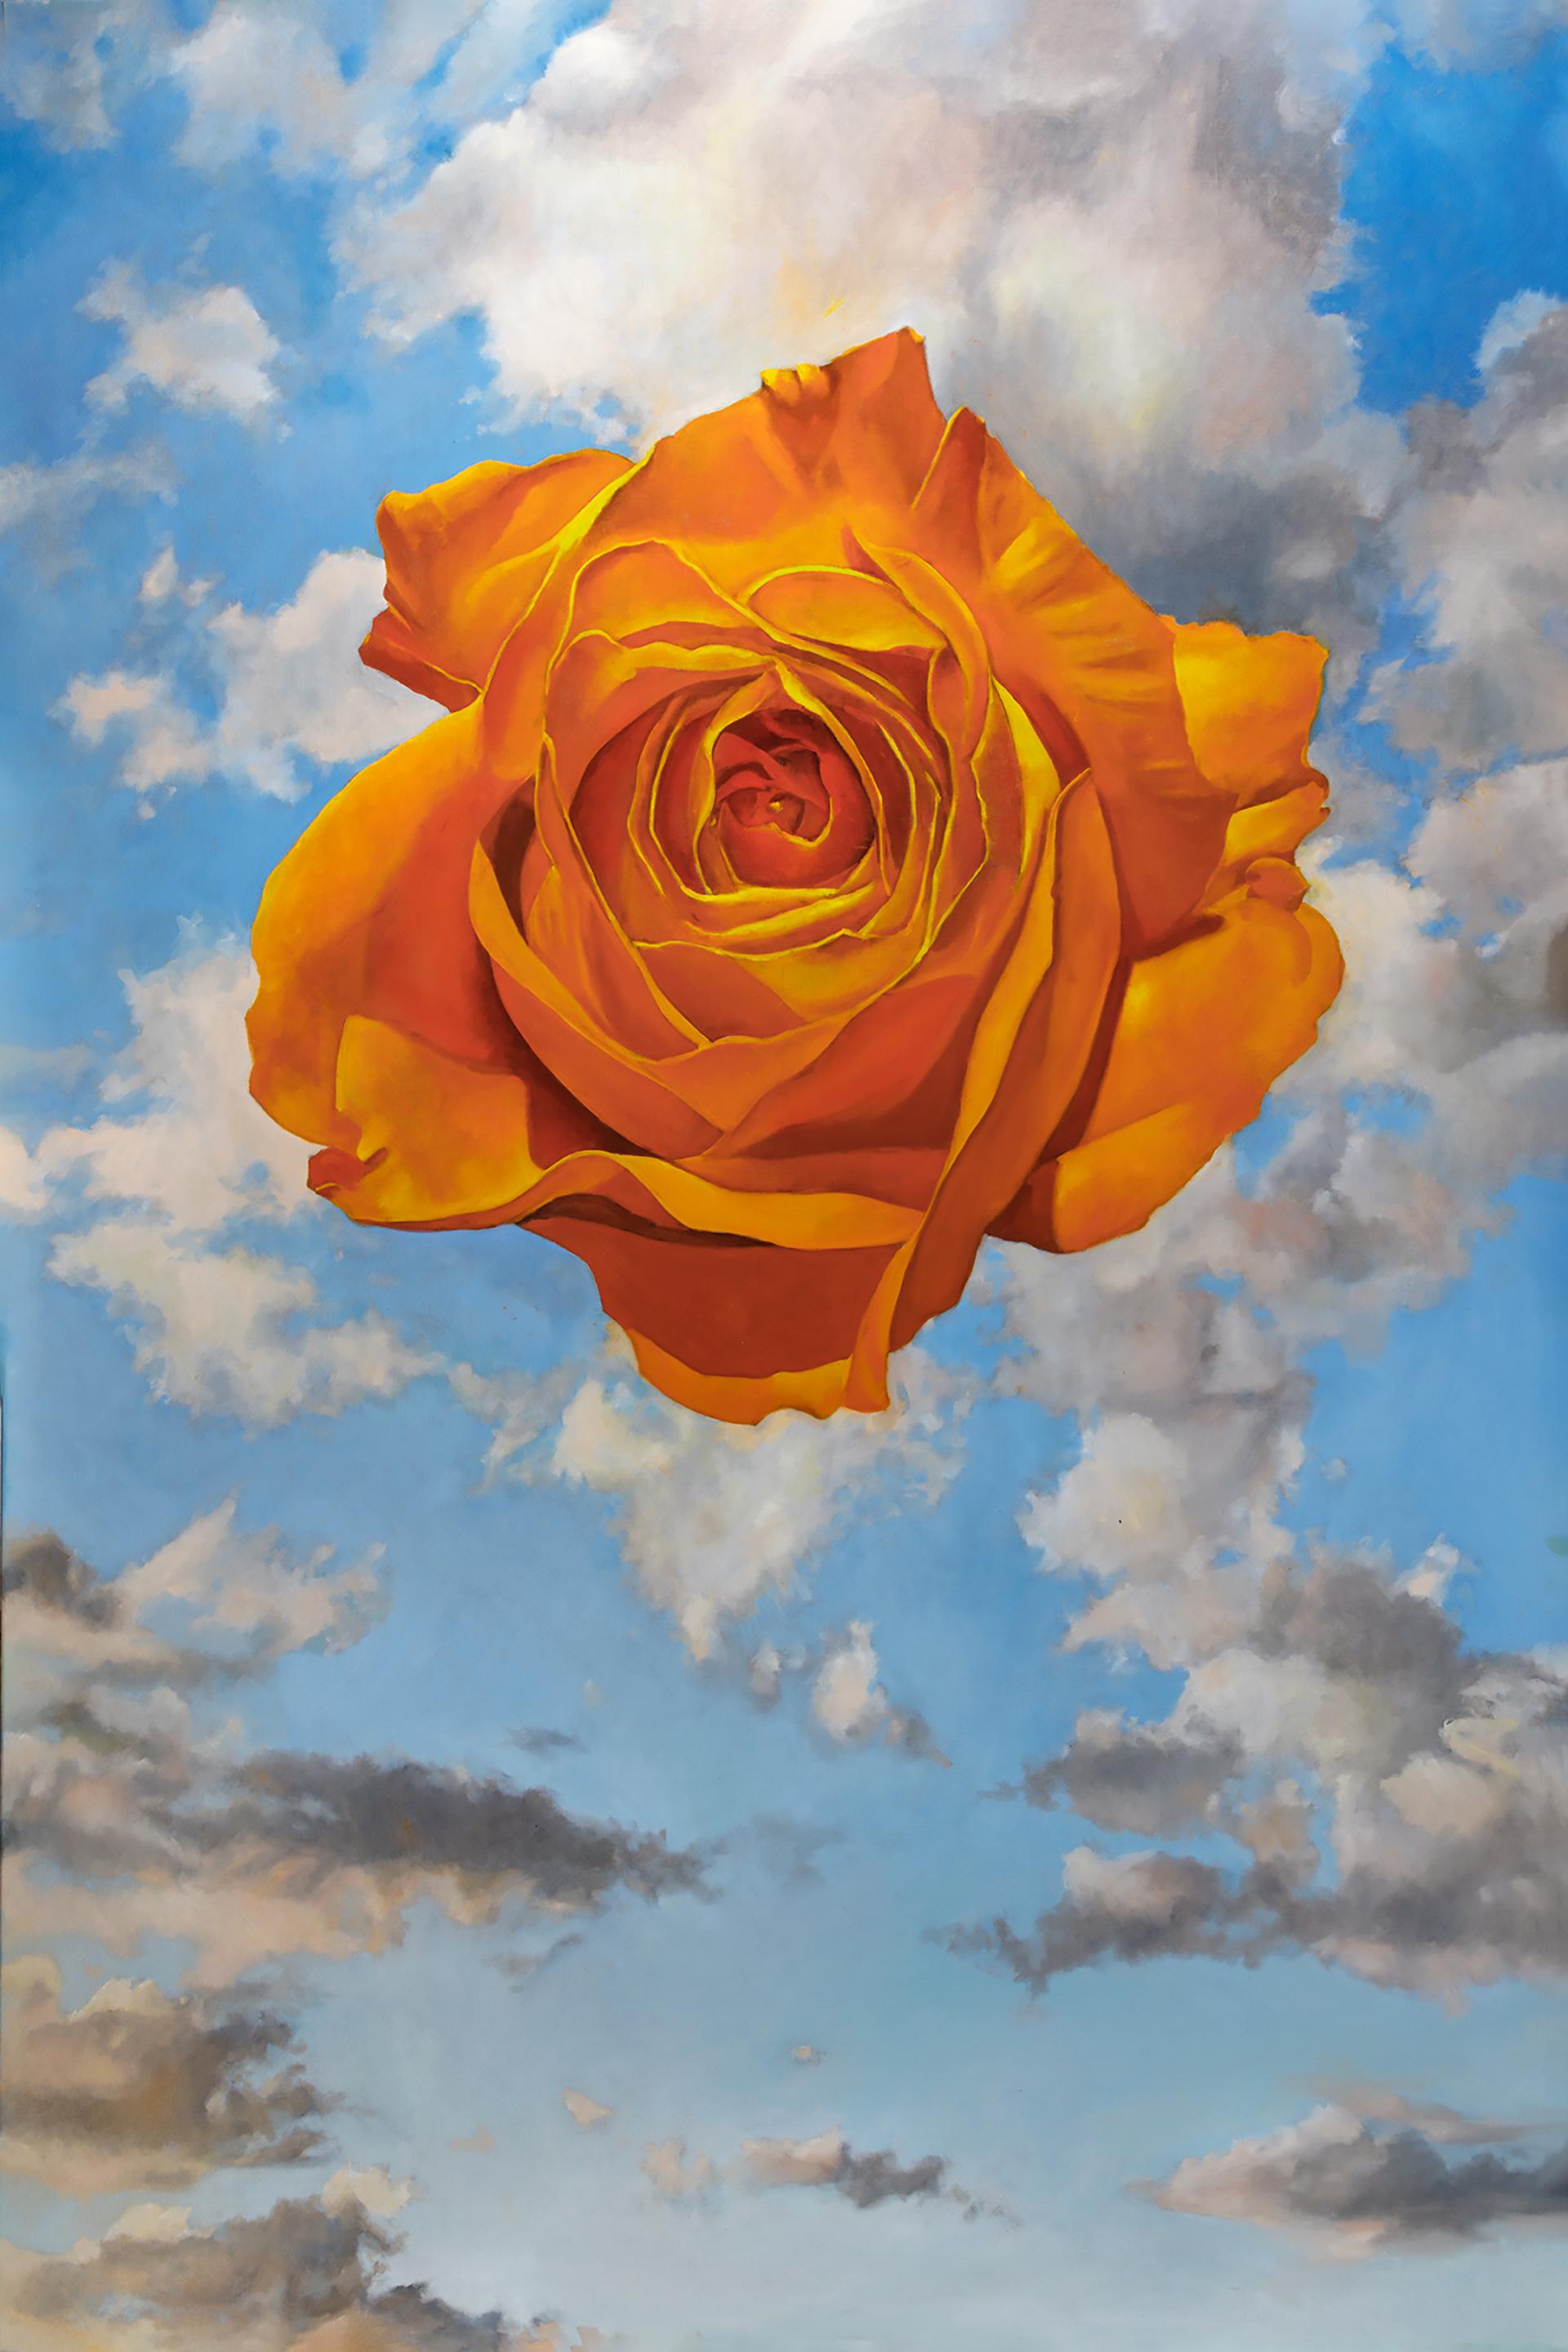 Jim Wise Abstract Painting - "Acolyte" - surreal floral painting - clouds - Rene Magritte